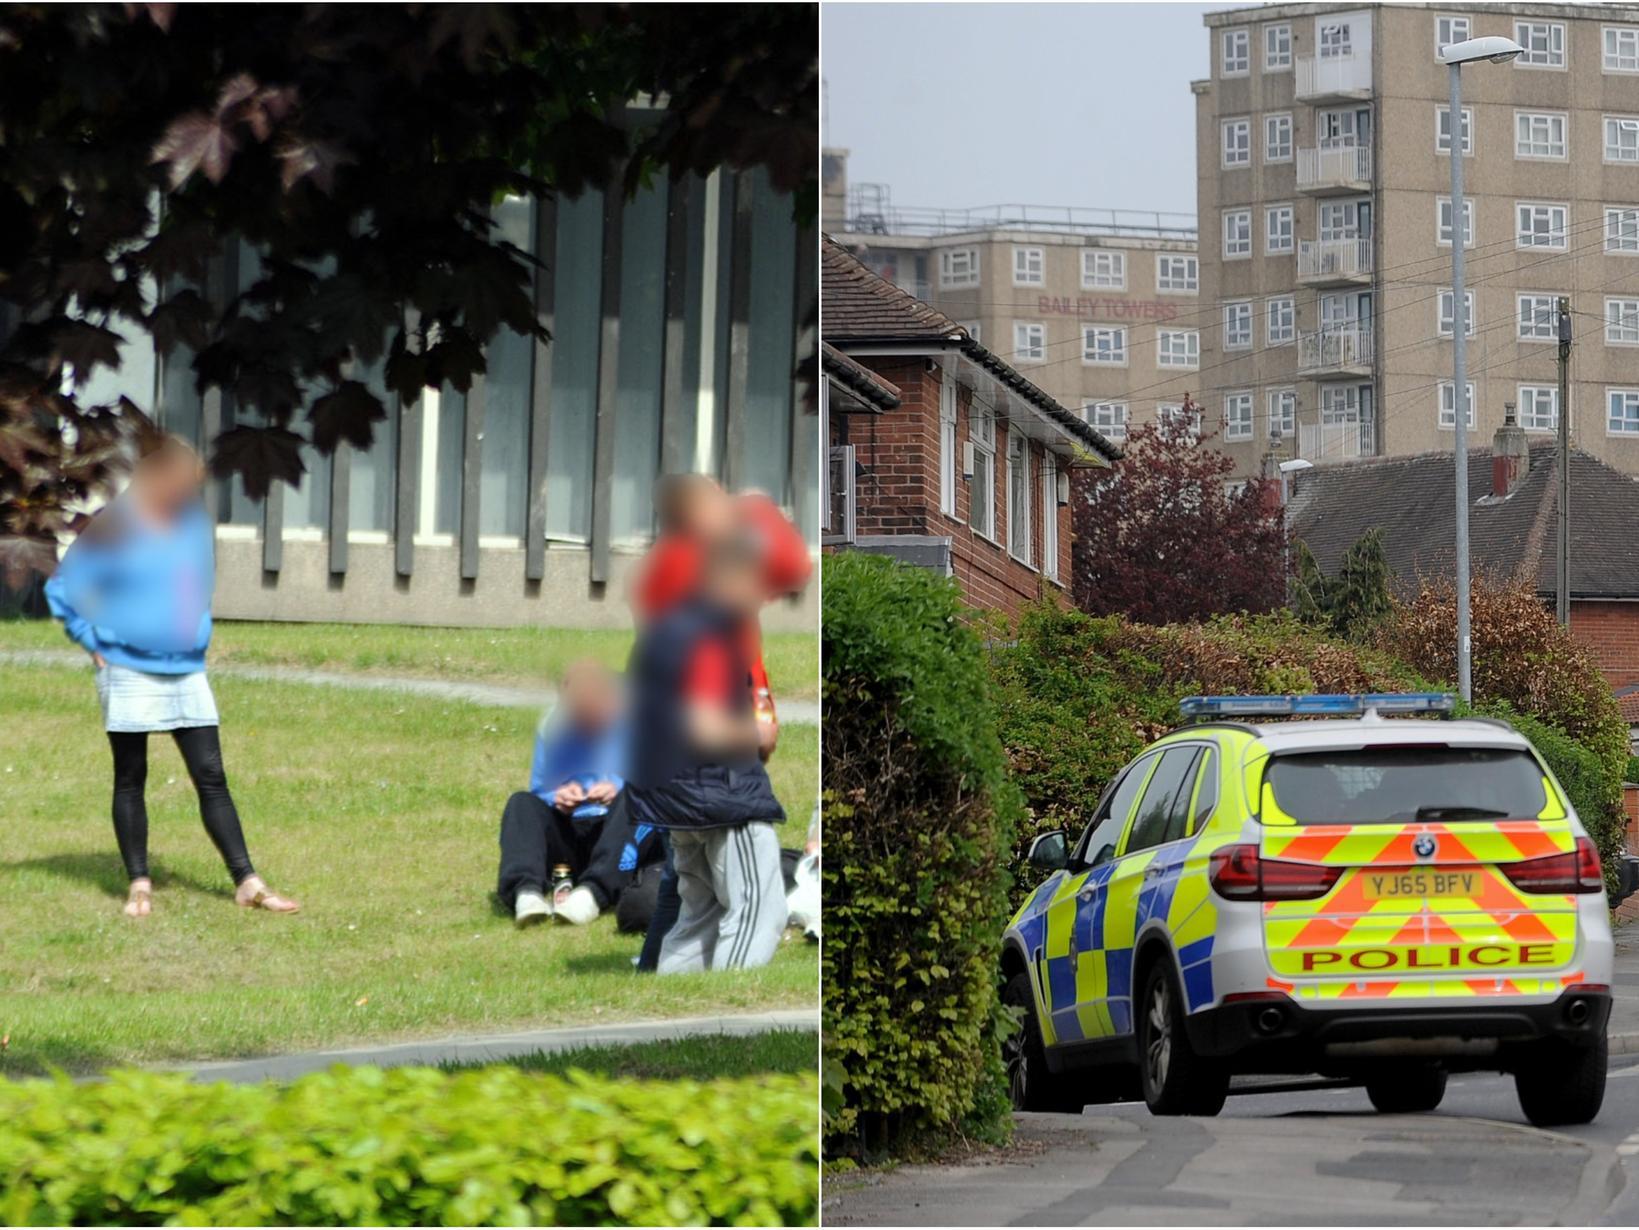 The 10 Leeds areas with the most antisocial behaviour in just one month - revealed by police figures